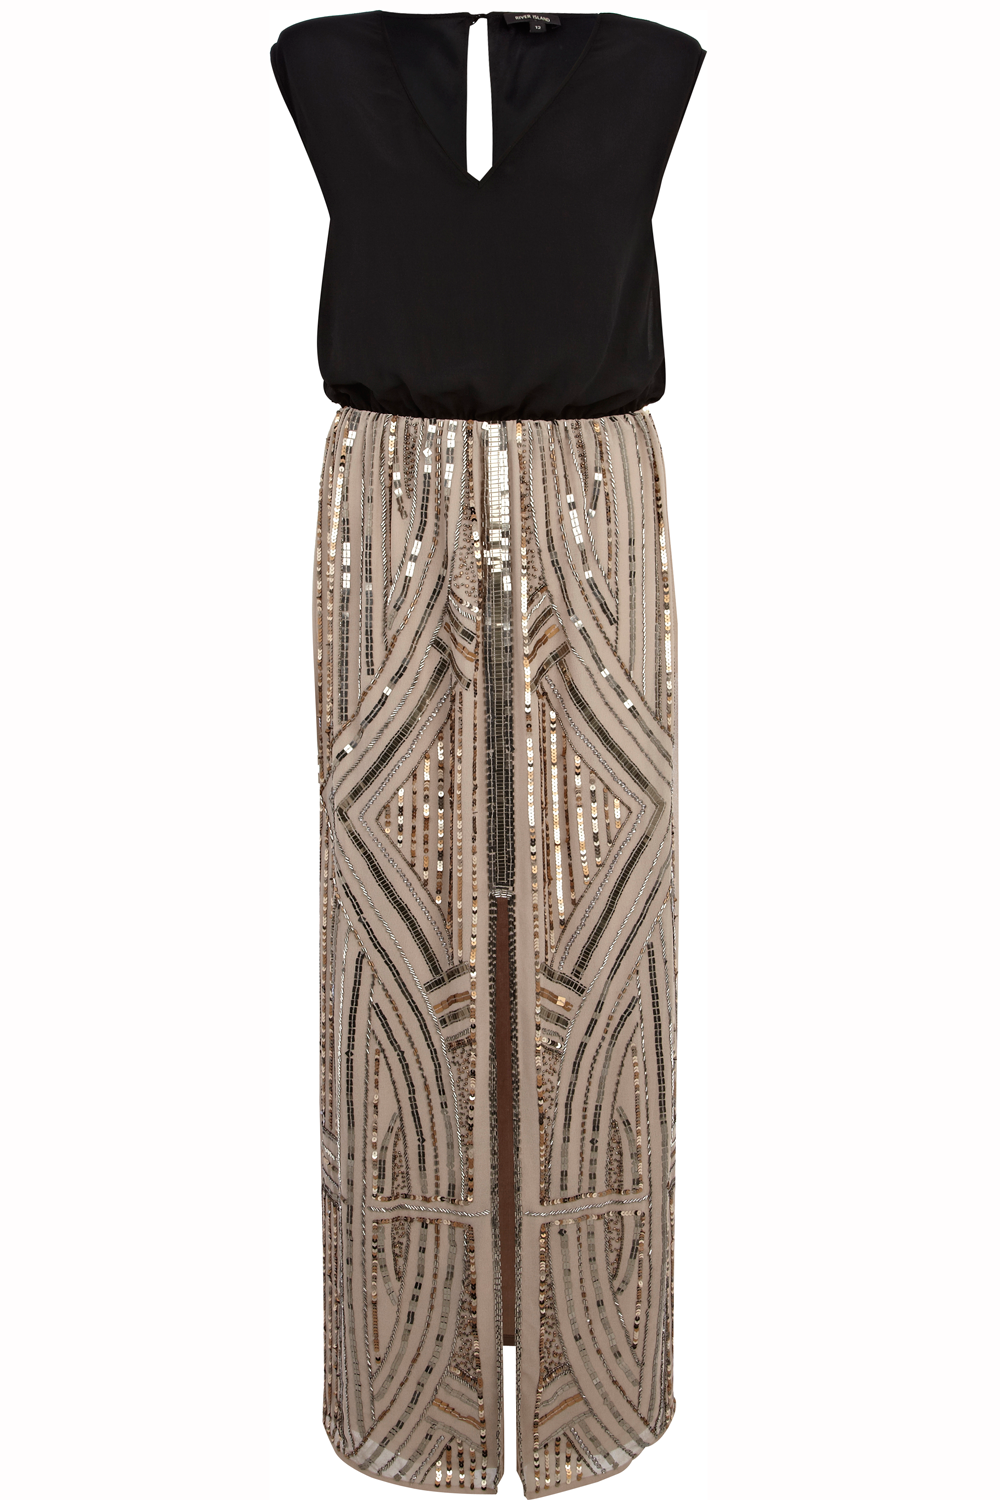 River Island Sparkly Dress - Special In 2017-2018